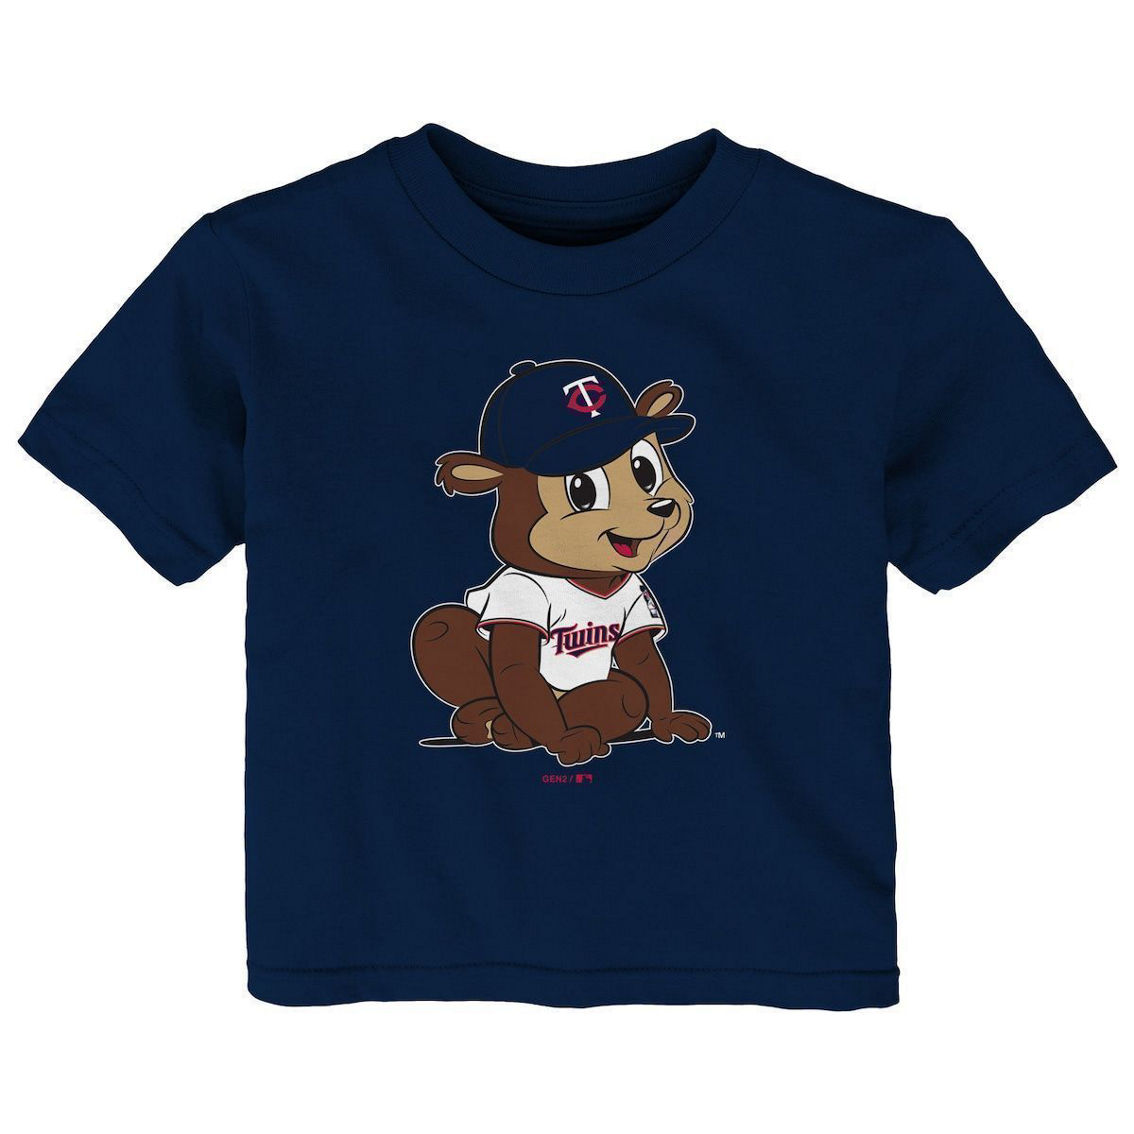 Outerstuff Infant Navy Minnesota Twins Baby Mascot T-Shirt - Image 2 of 2